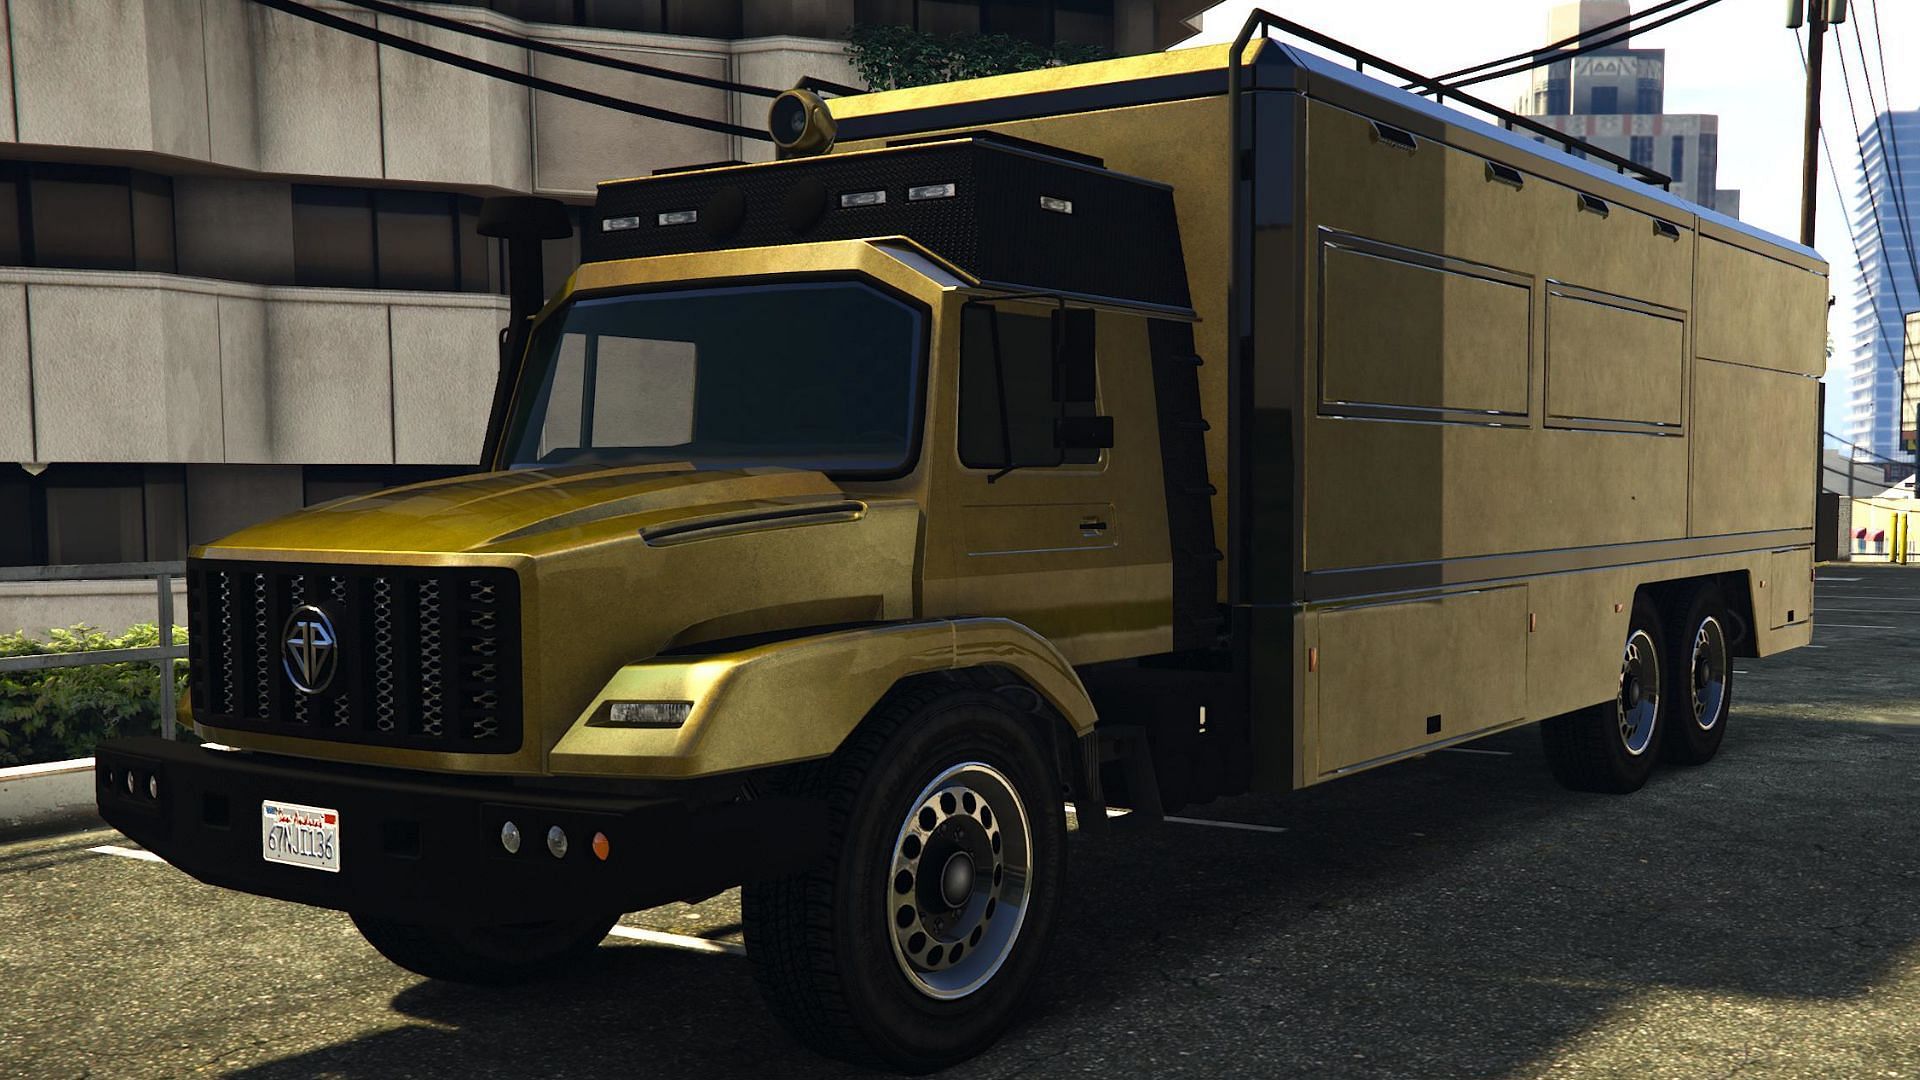 The Terrorbyte is a good armored vehicle in GTA Online